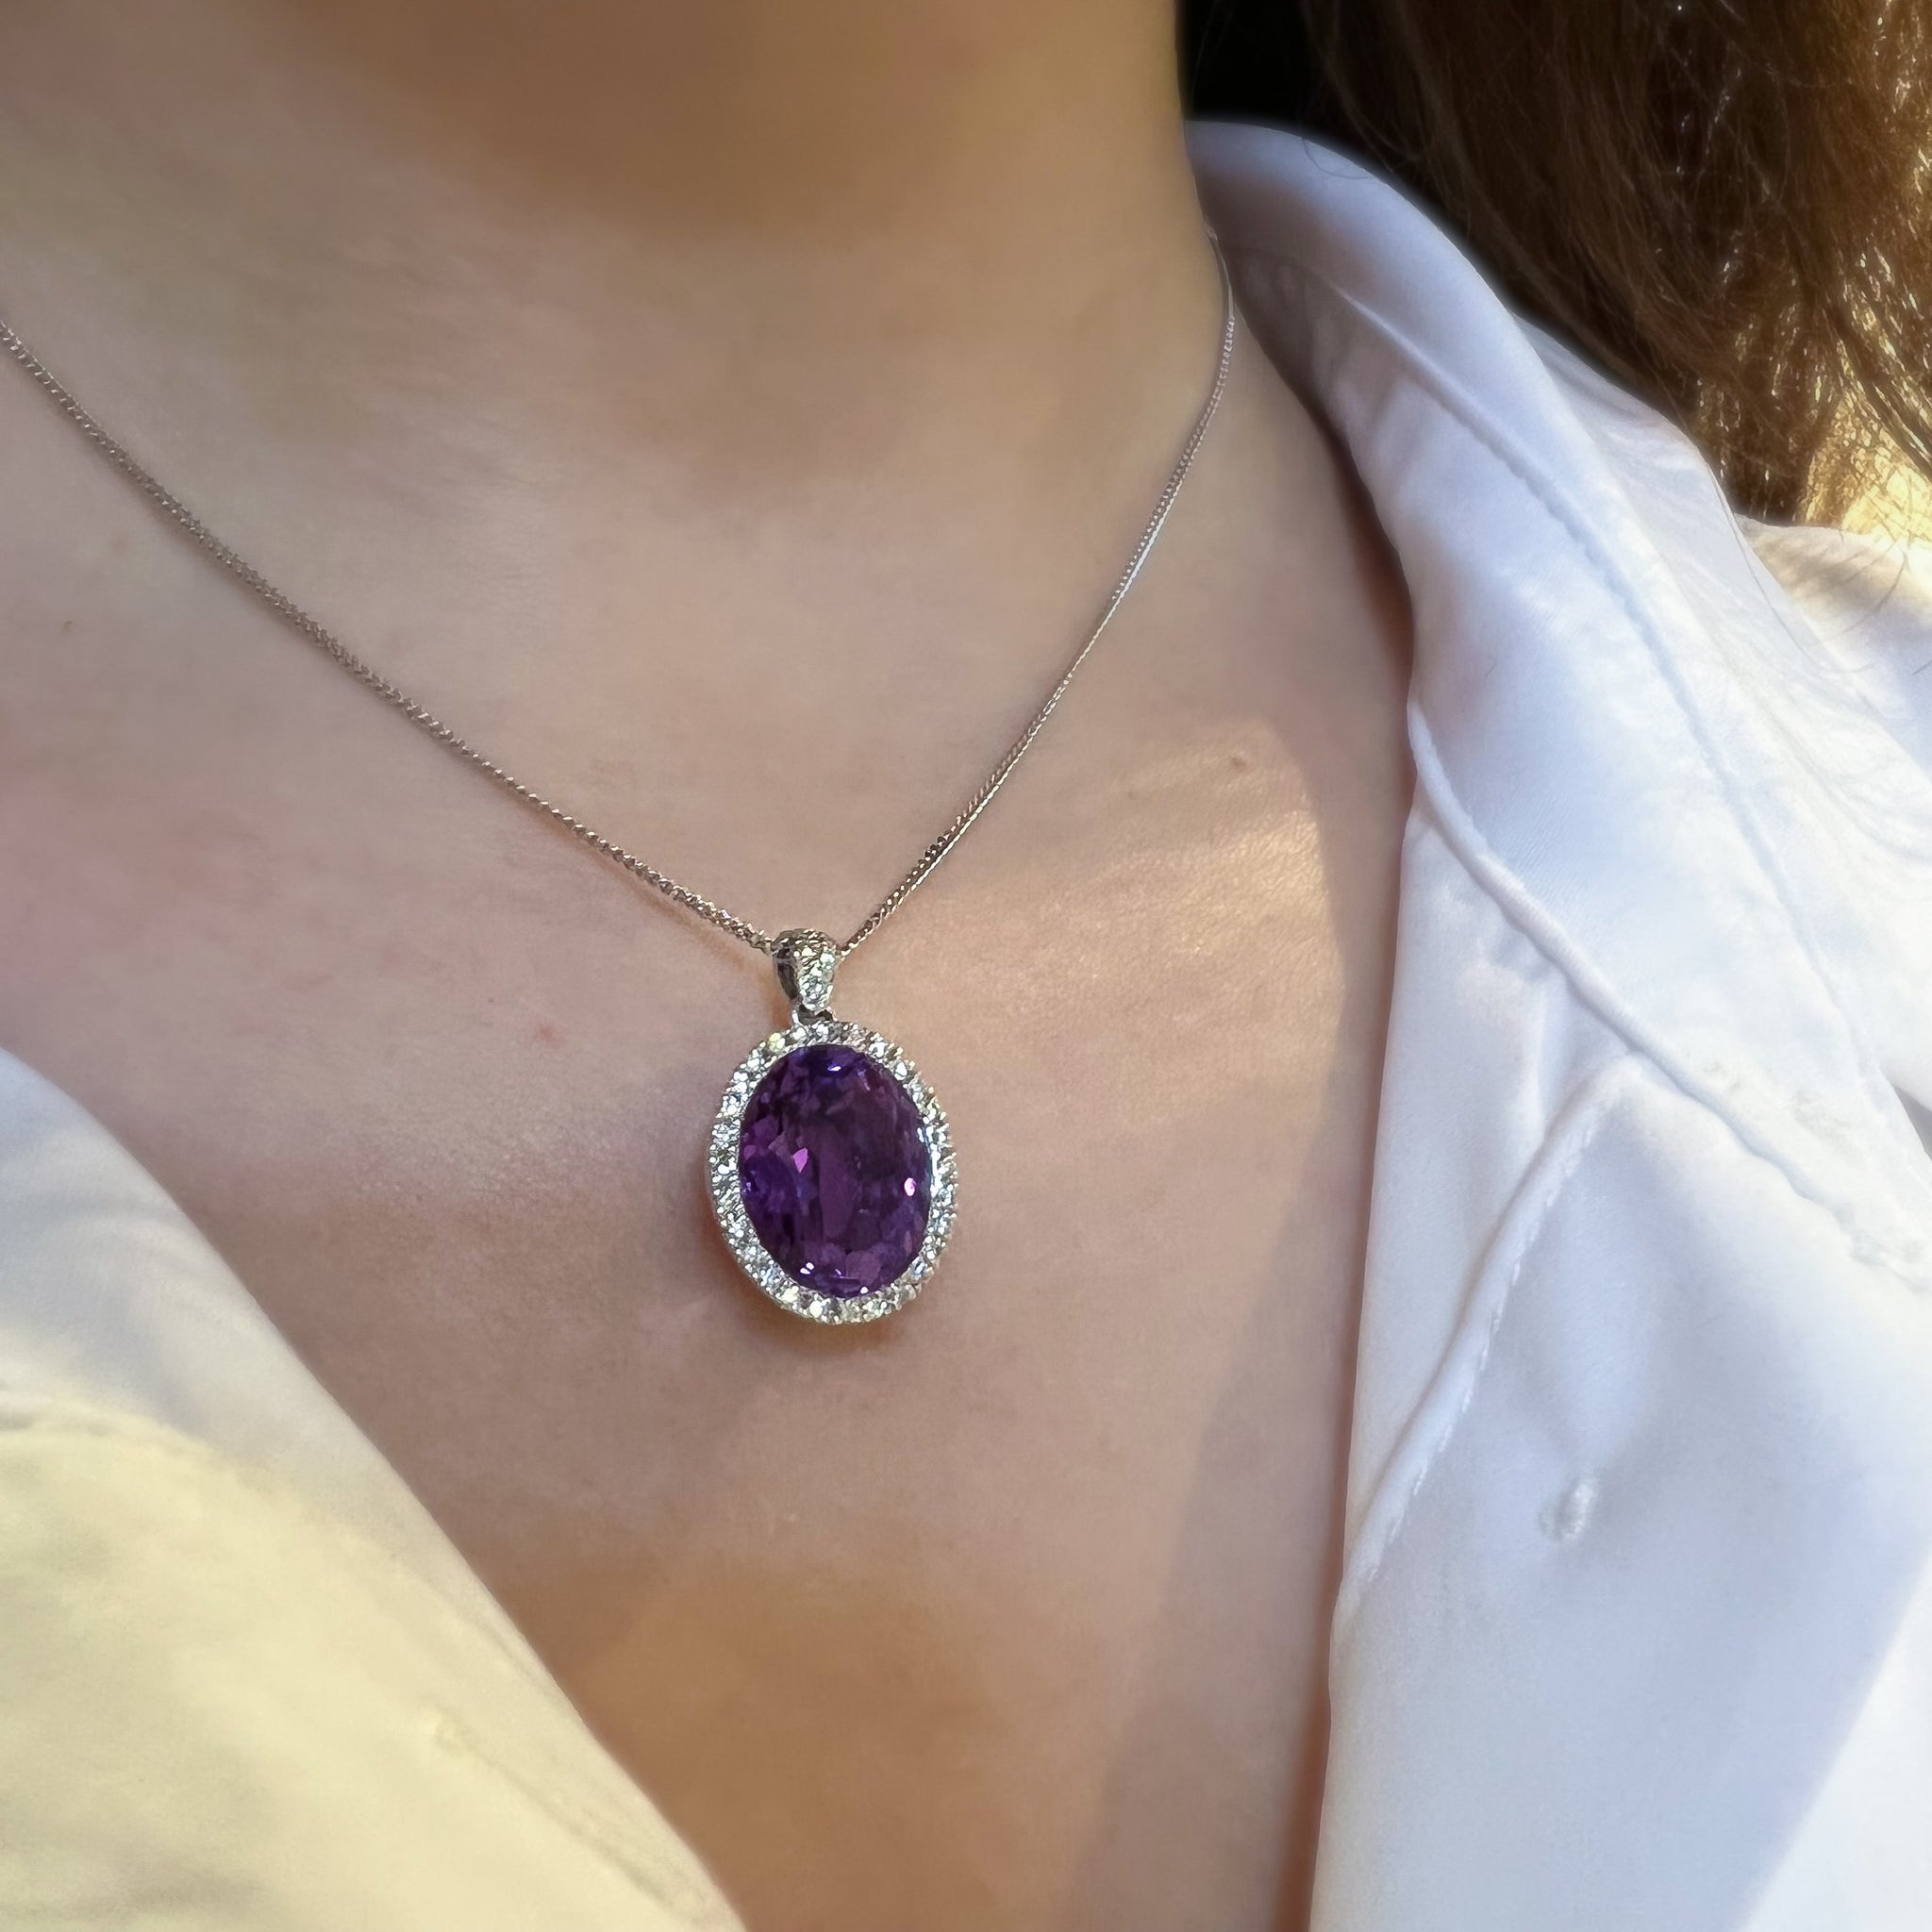 9ct White Gold 4.75ct Oval Amethyst and Diamond Pendant